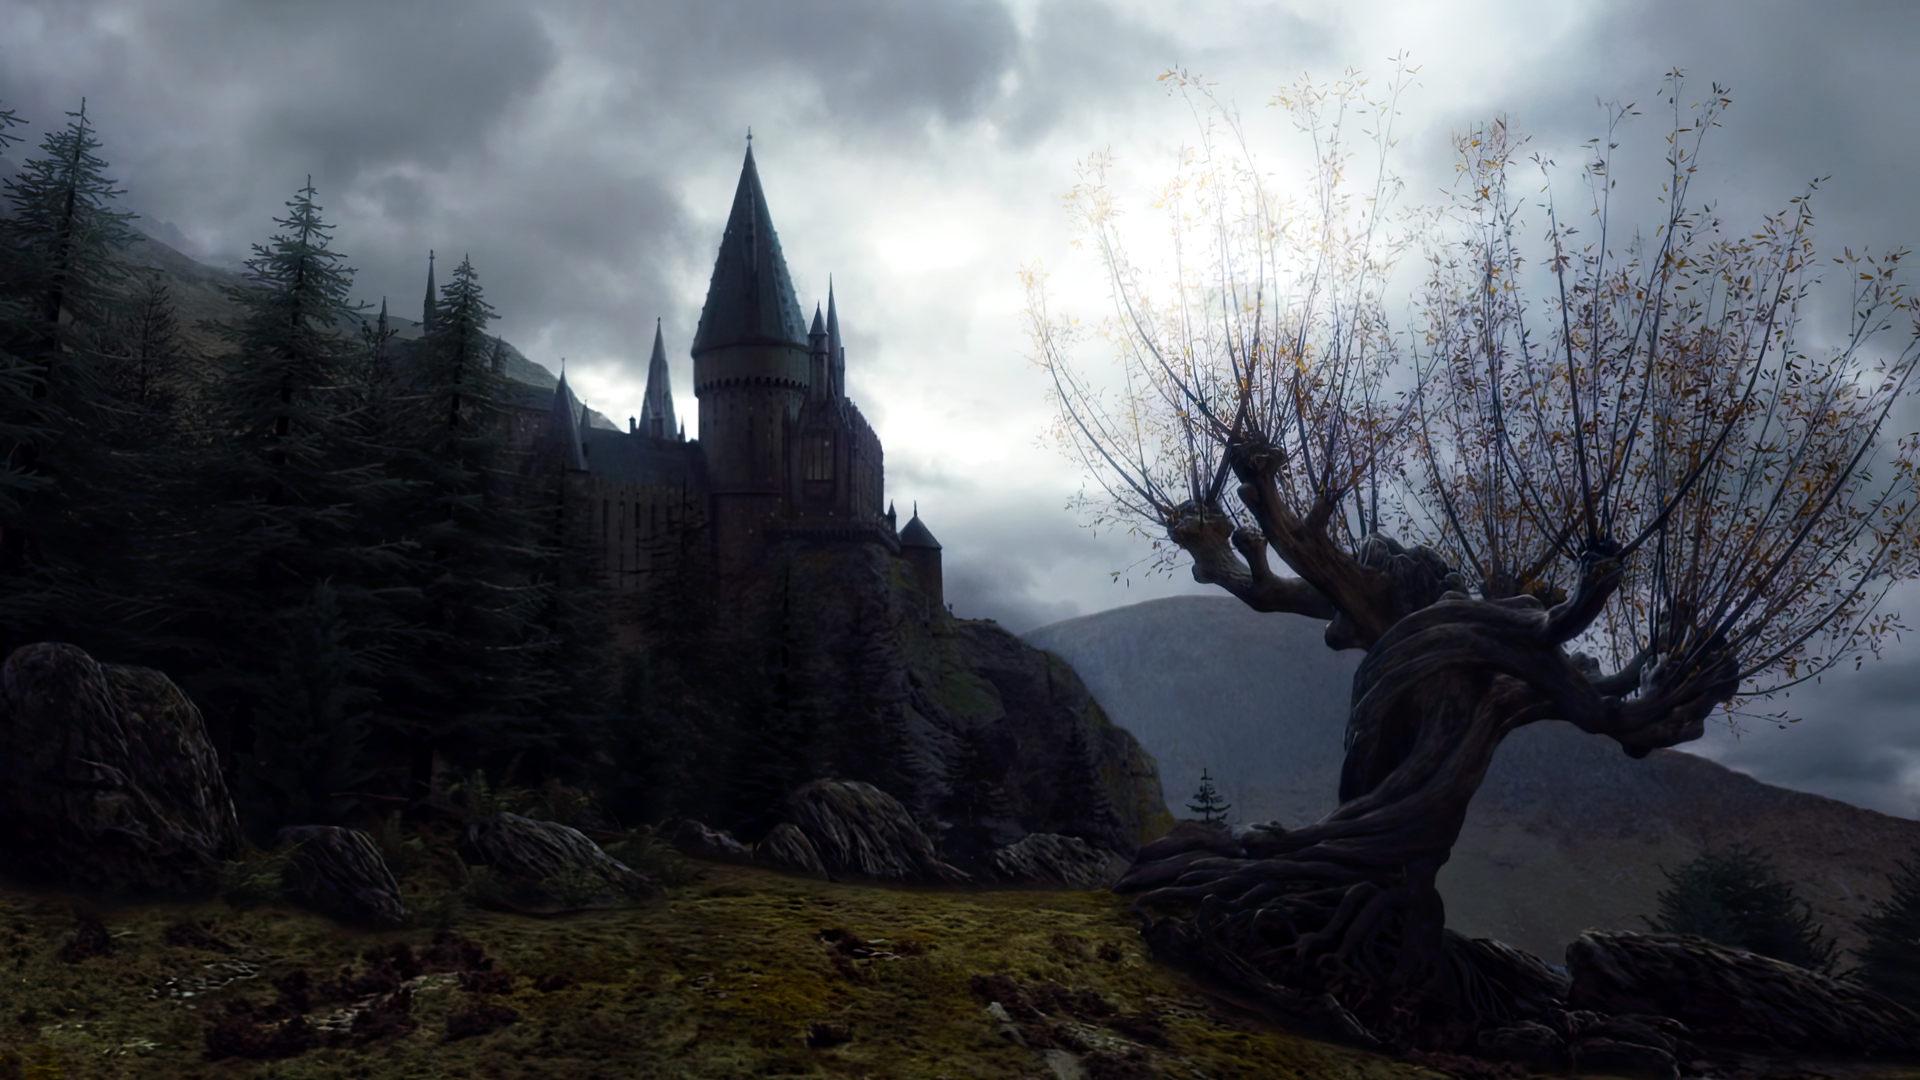 General 1920x1080 movies Whomping Willow clouds trees rocks castle Harry Potter Harry Potter and the Prisoner of Azkaban J.K. Rowling